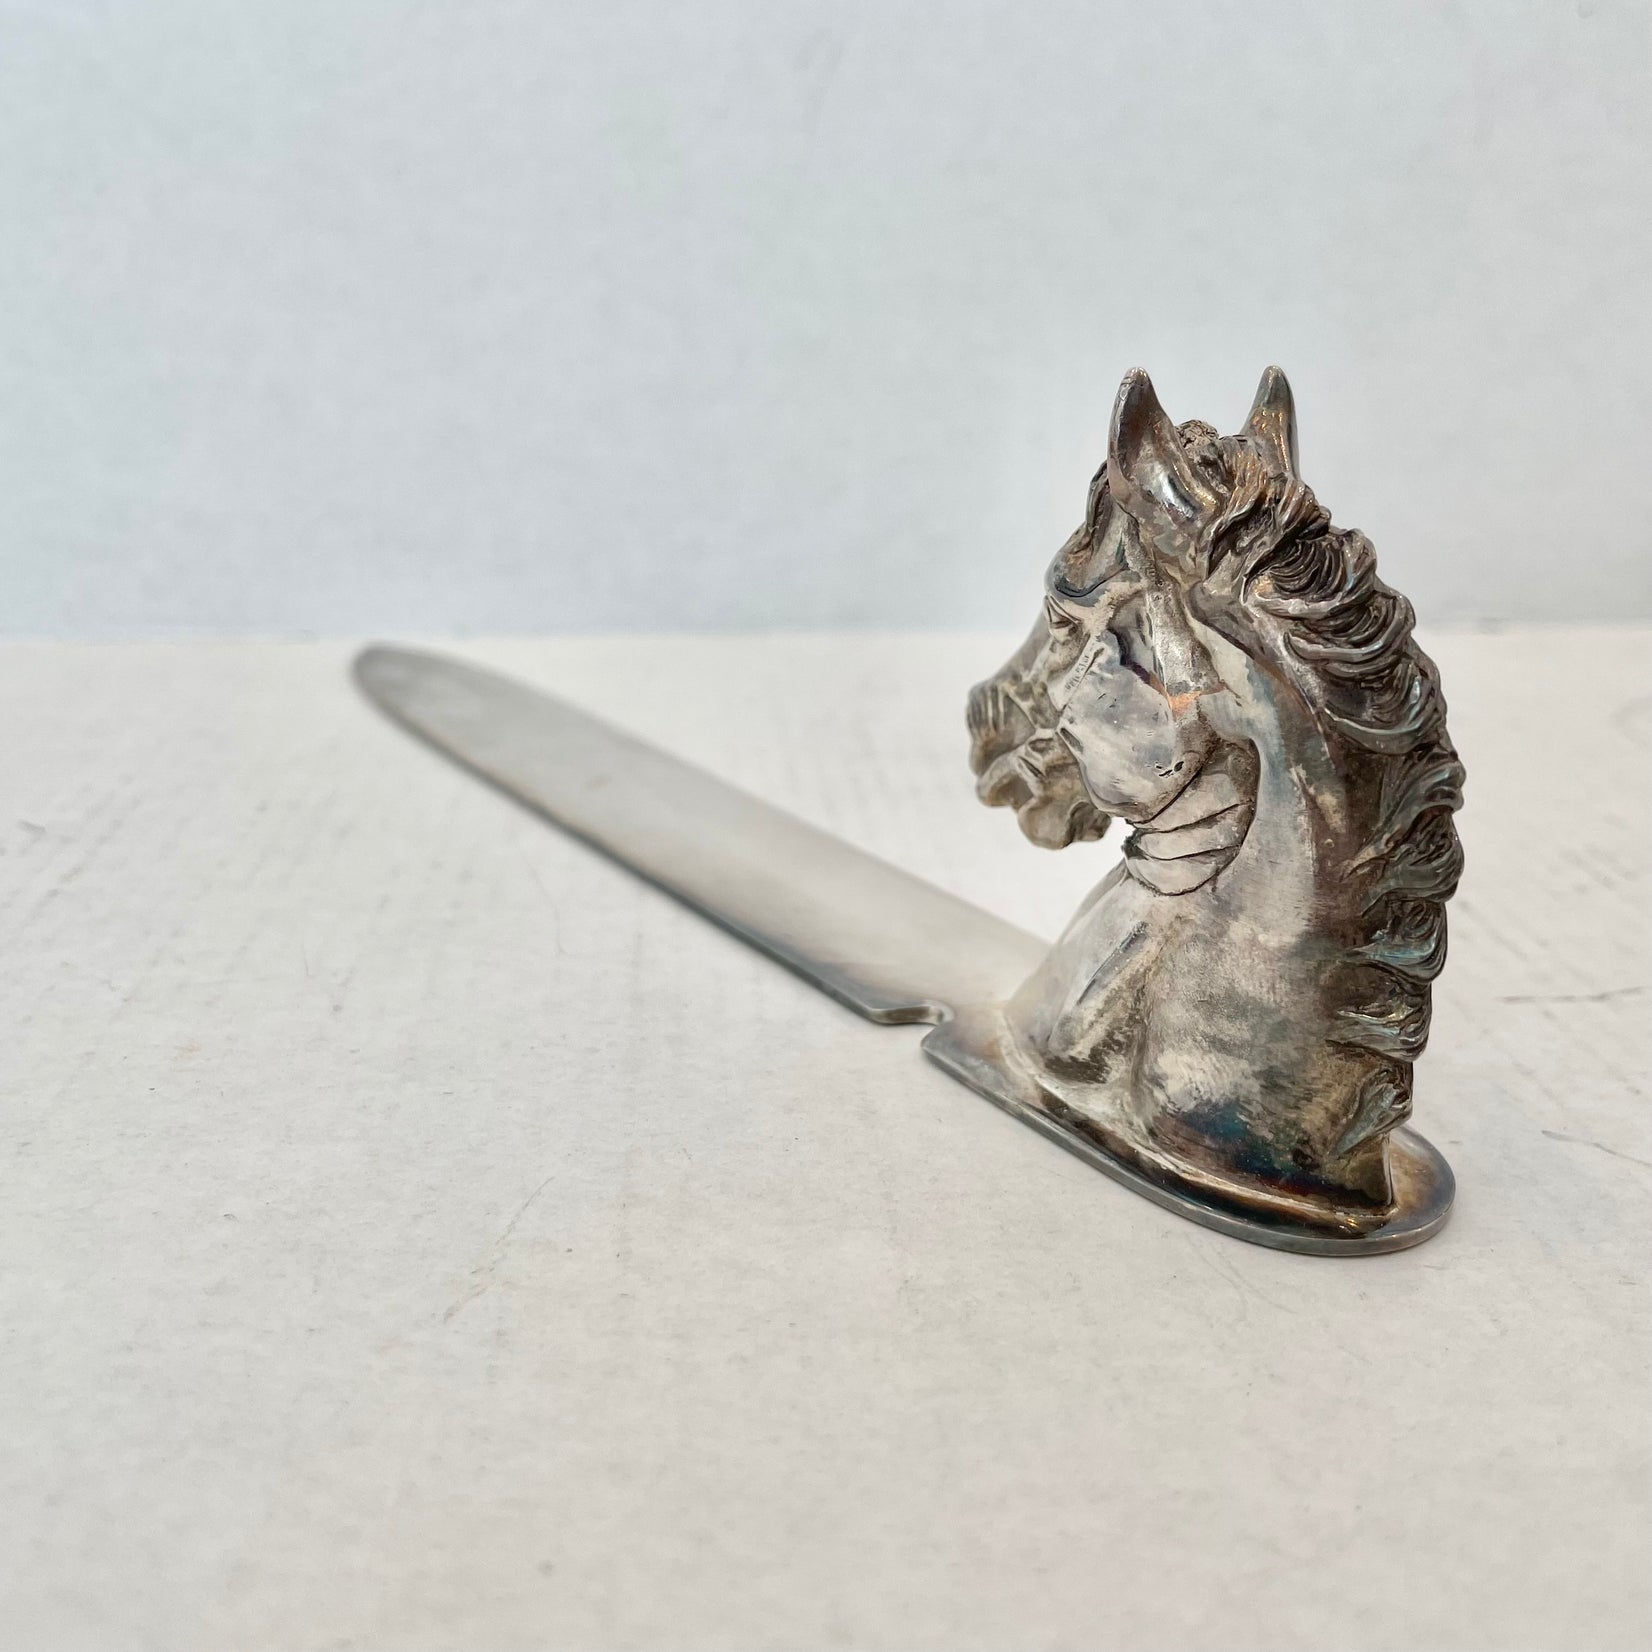 Reed & Barton Equestrian Letter Opener, 1940s USA